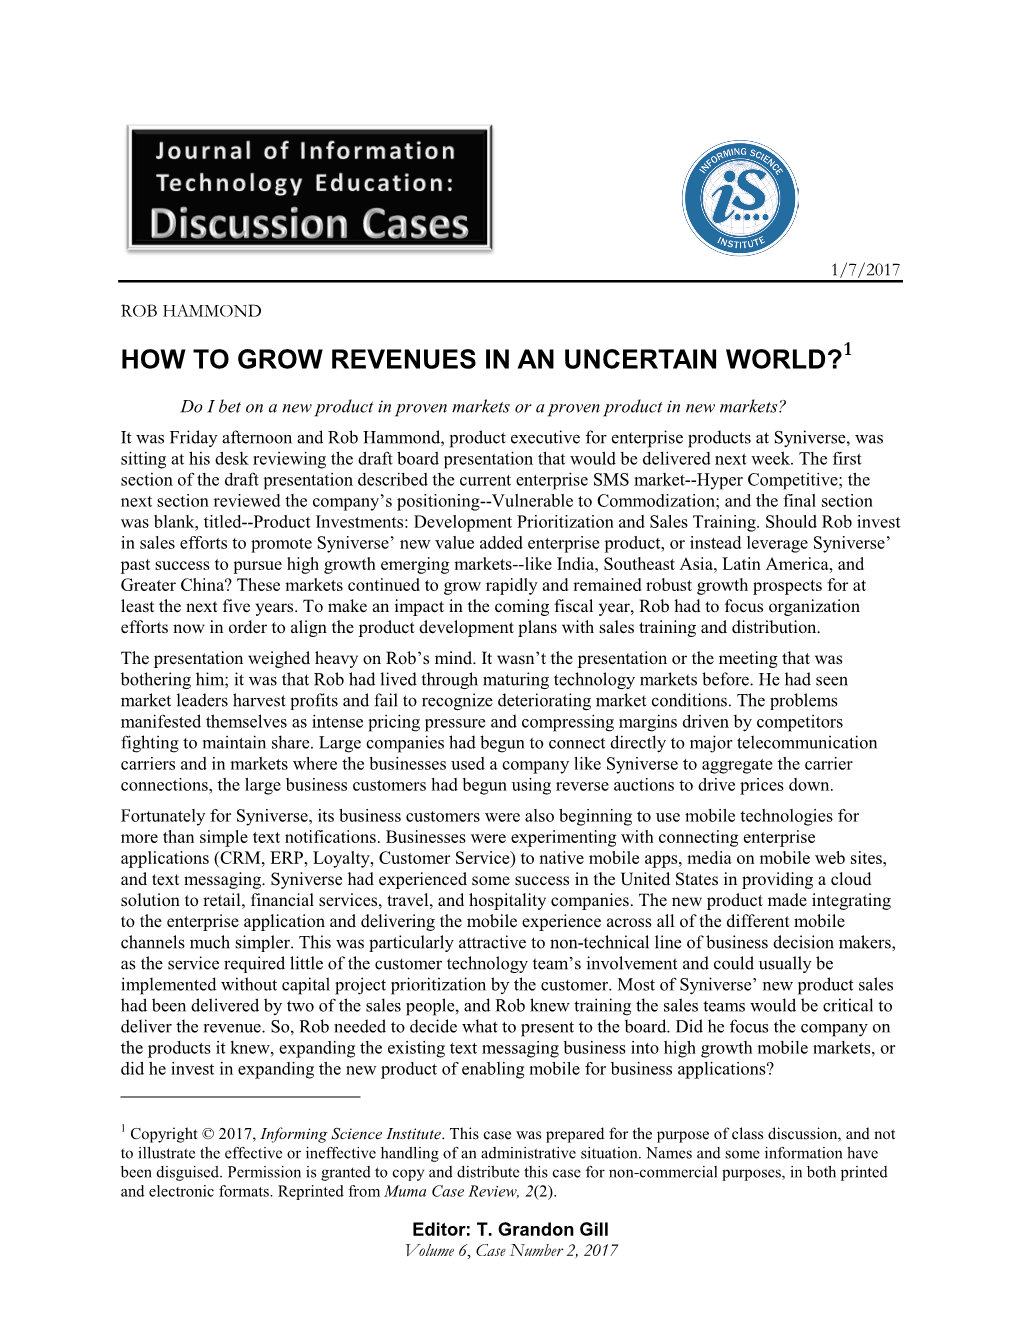 How to Grow Revenues in an Uncertain World?1